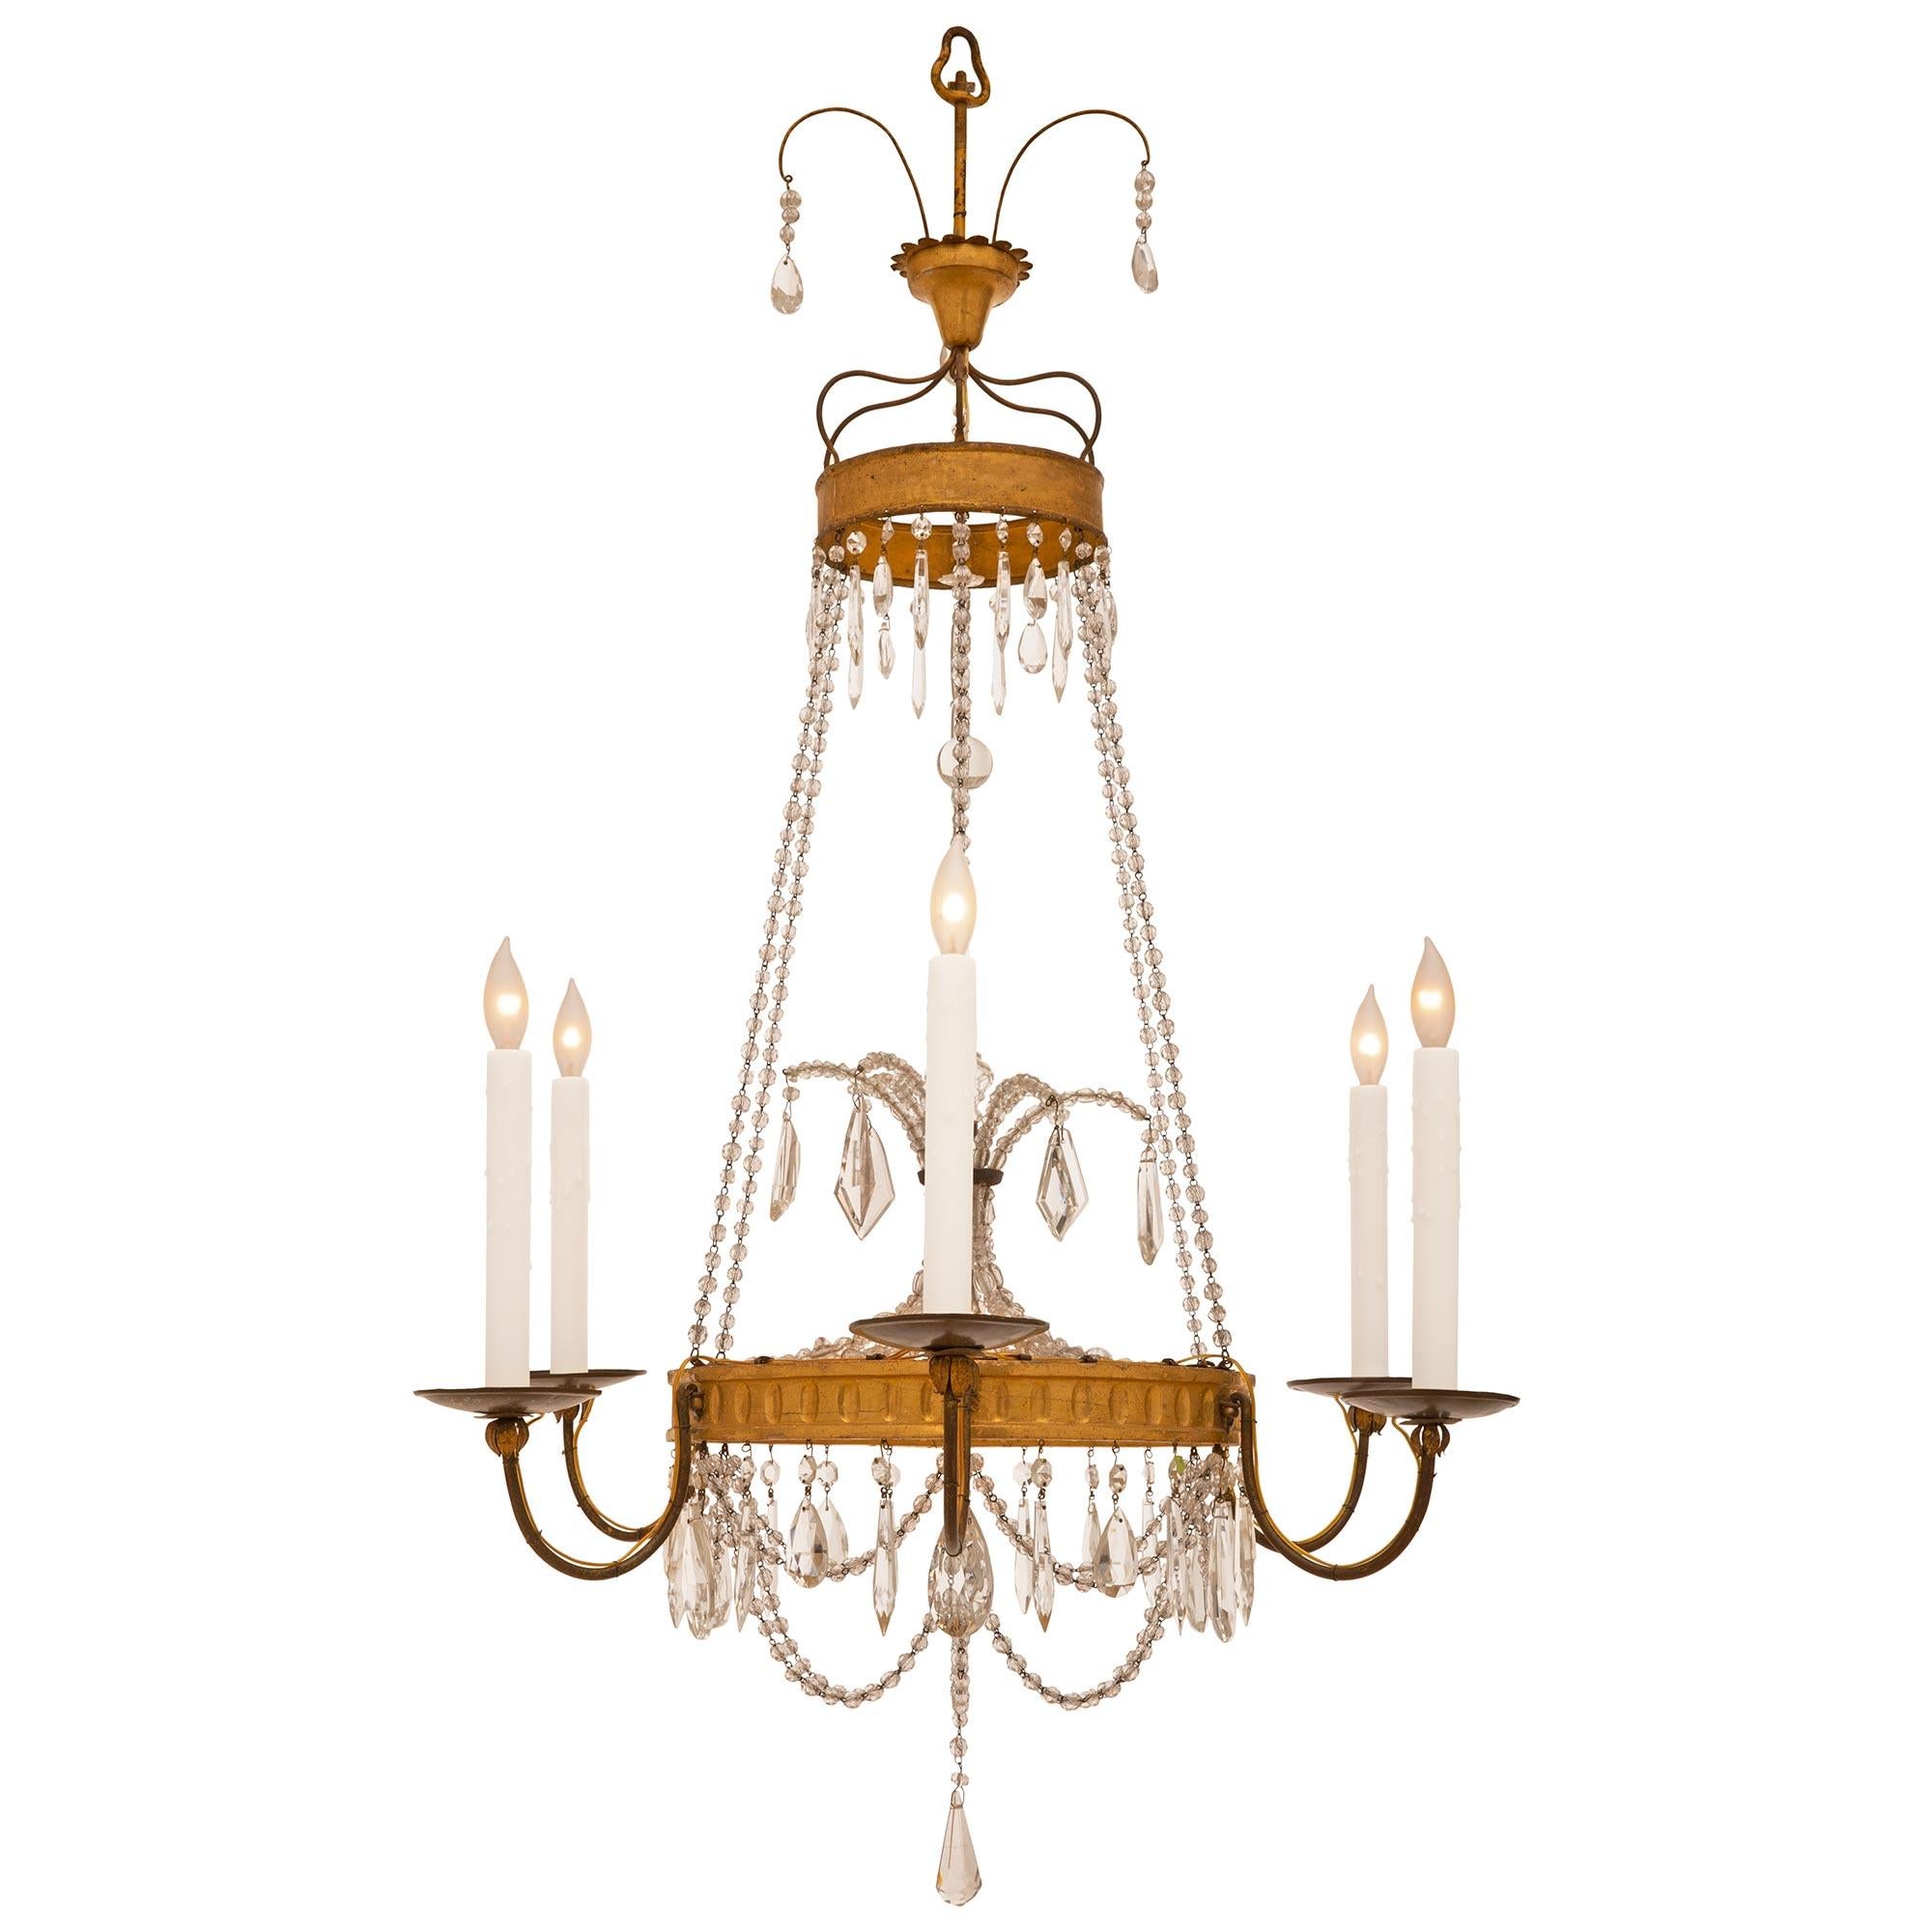 A elegant associated pair of Italian 19th century crystal, giltwood and gilt metal chandeliers. This complementary pair displays eight gilt metal arms on one, and six on the other. At the bottom of each chandelier is an elegant cut crystal pendant